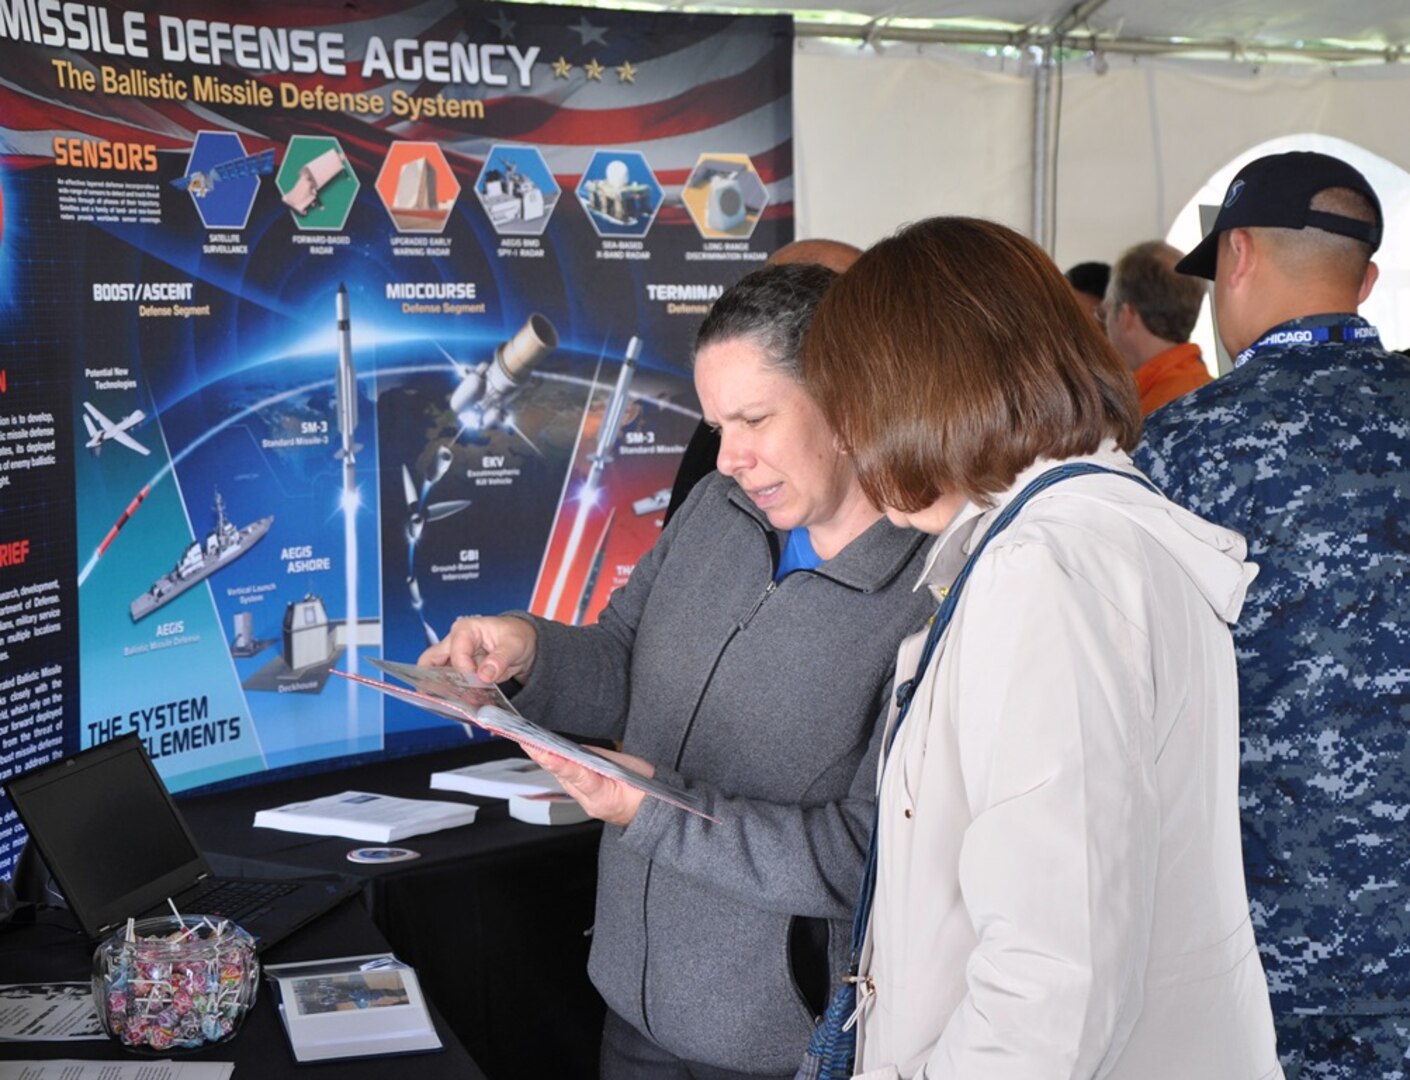 IMAGE: DAHLGREN, Va. (Oct. 16, 2017) – Military and civilian personnel learn more about the Aegis Ballistic Missile Defense (BMD) command in the exhibit tent while celebrating the centennial of the Navy base at Dahlgren. Aegis BMD is both the Navy element of the Missile Defense Agency, as well as a field activity of the Naval Sea Systems Command. It builds upon and extends capabilities inherent in the Aegis Weapon System, Standard Missile, and Navy command and control systems. Aegis BMD ships provide the Combatant Commanders with significant flexibility to meet changing operational demands.